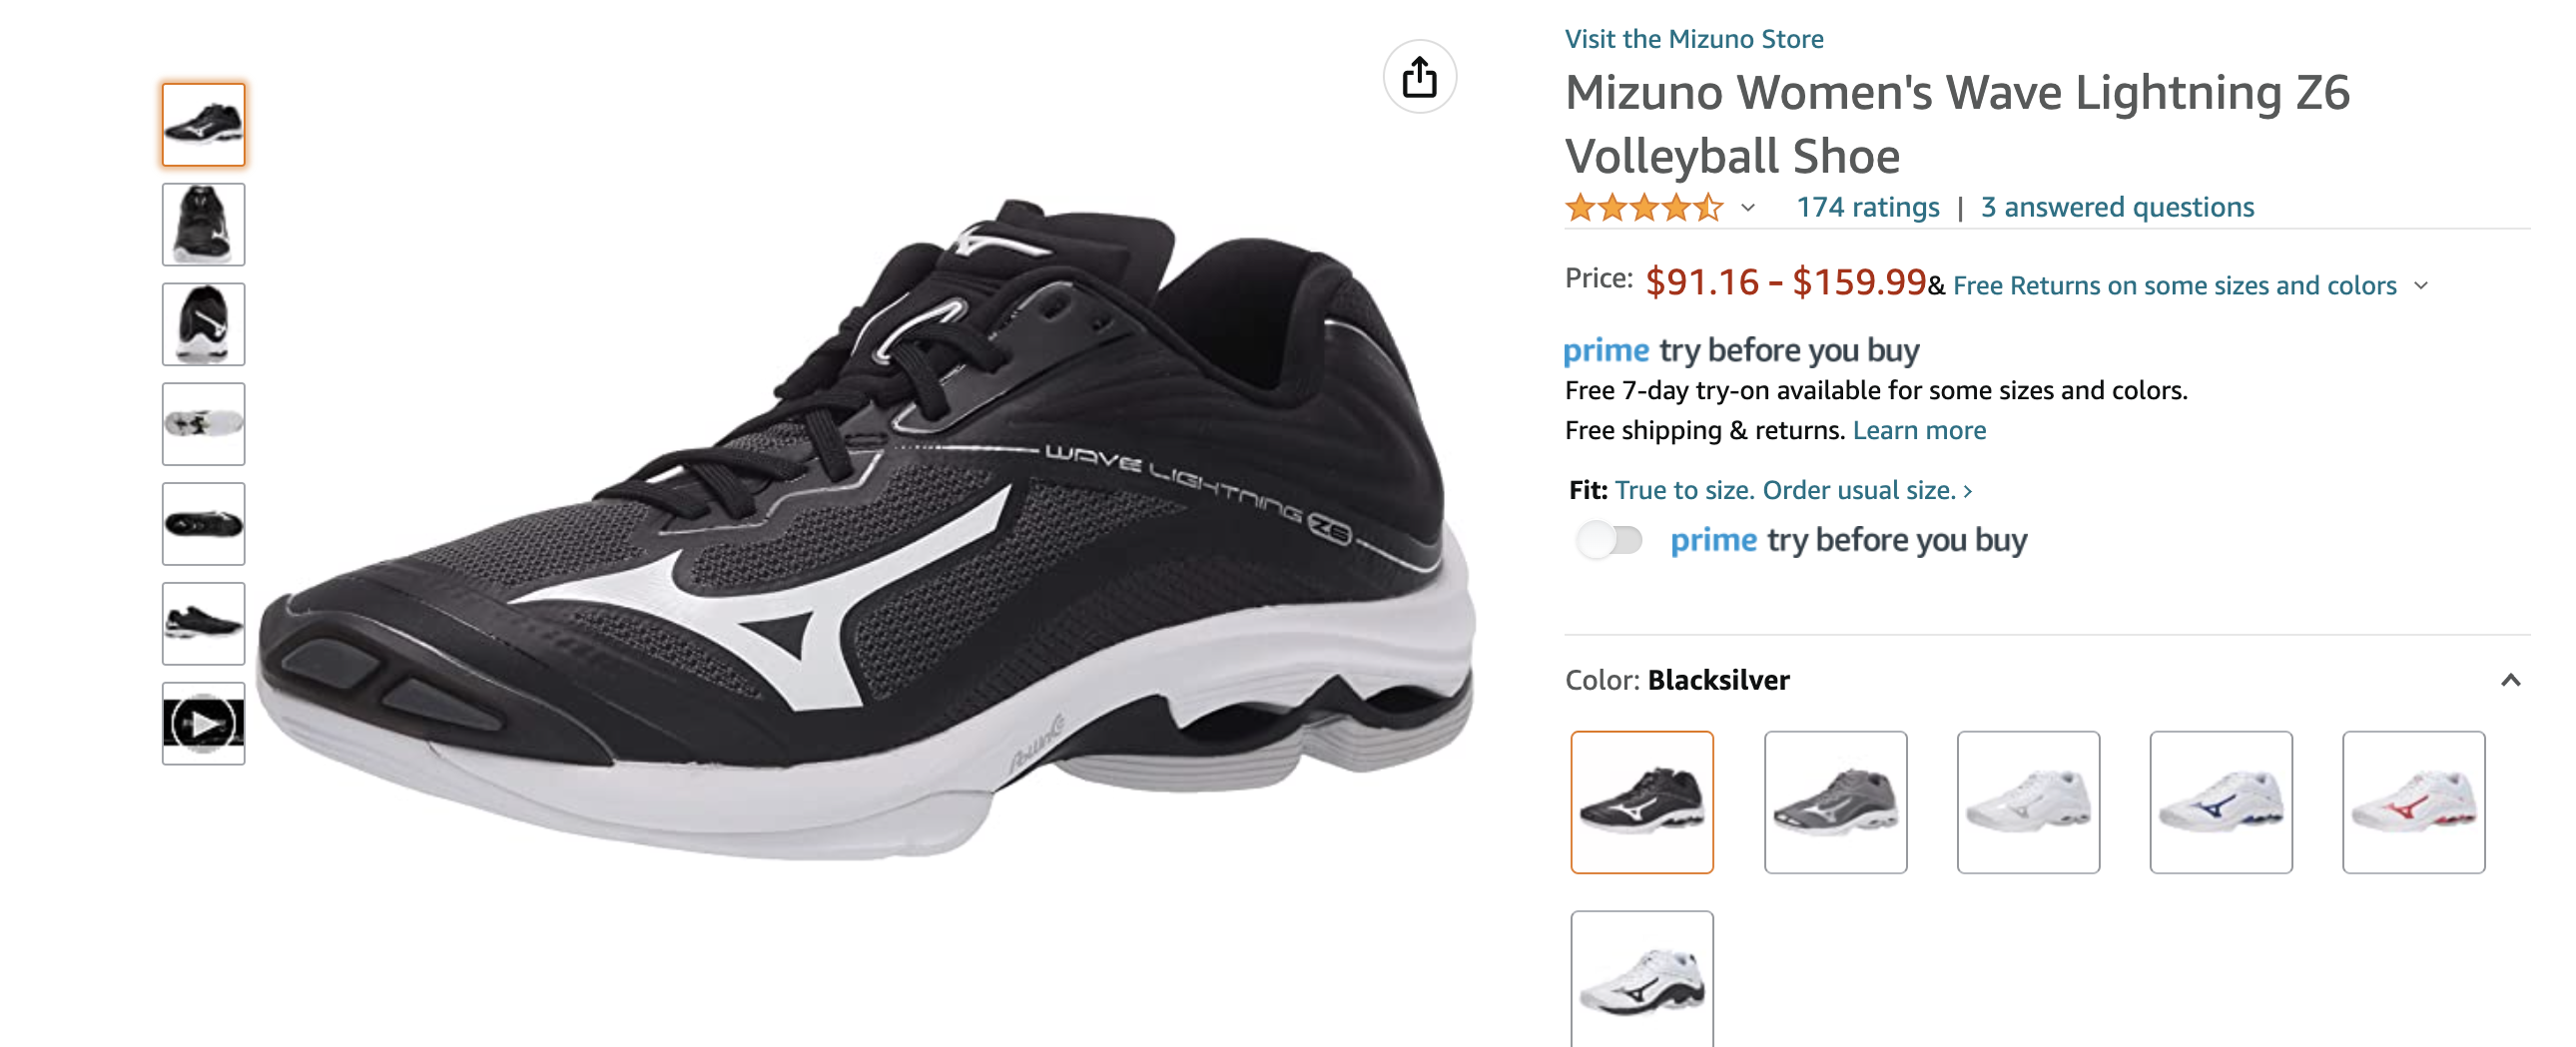 Bring your best game to life with a Mizuno Volleyball Shoe - find it on Amazon.com!